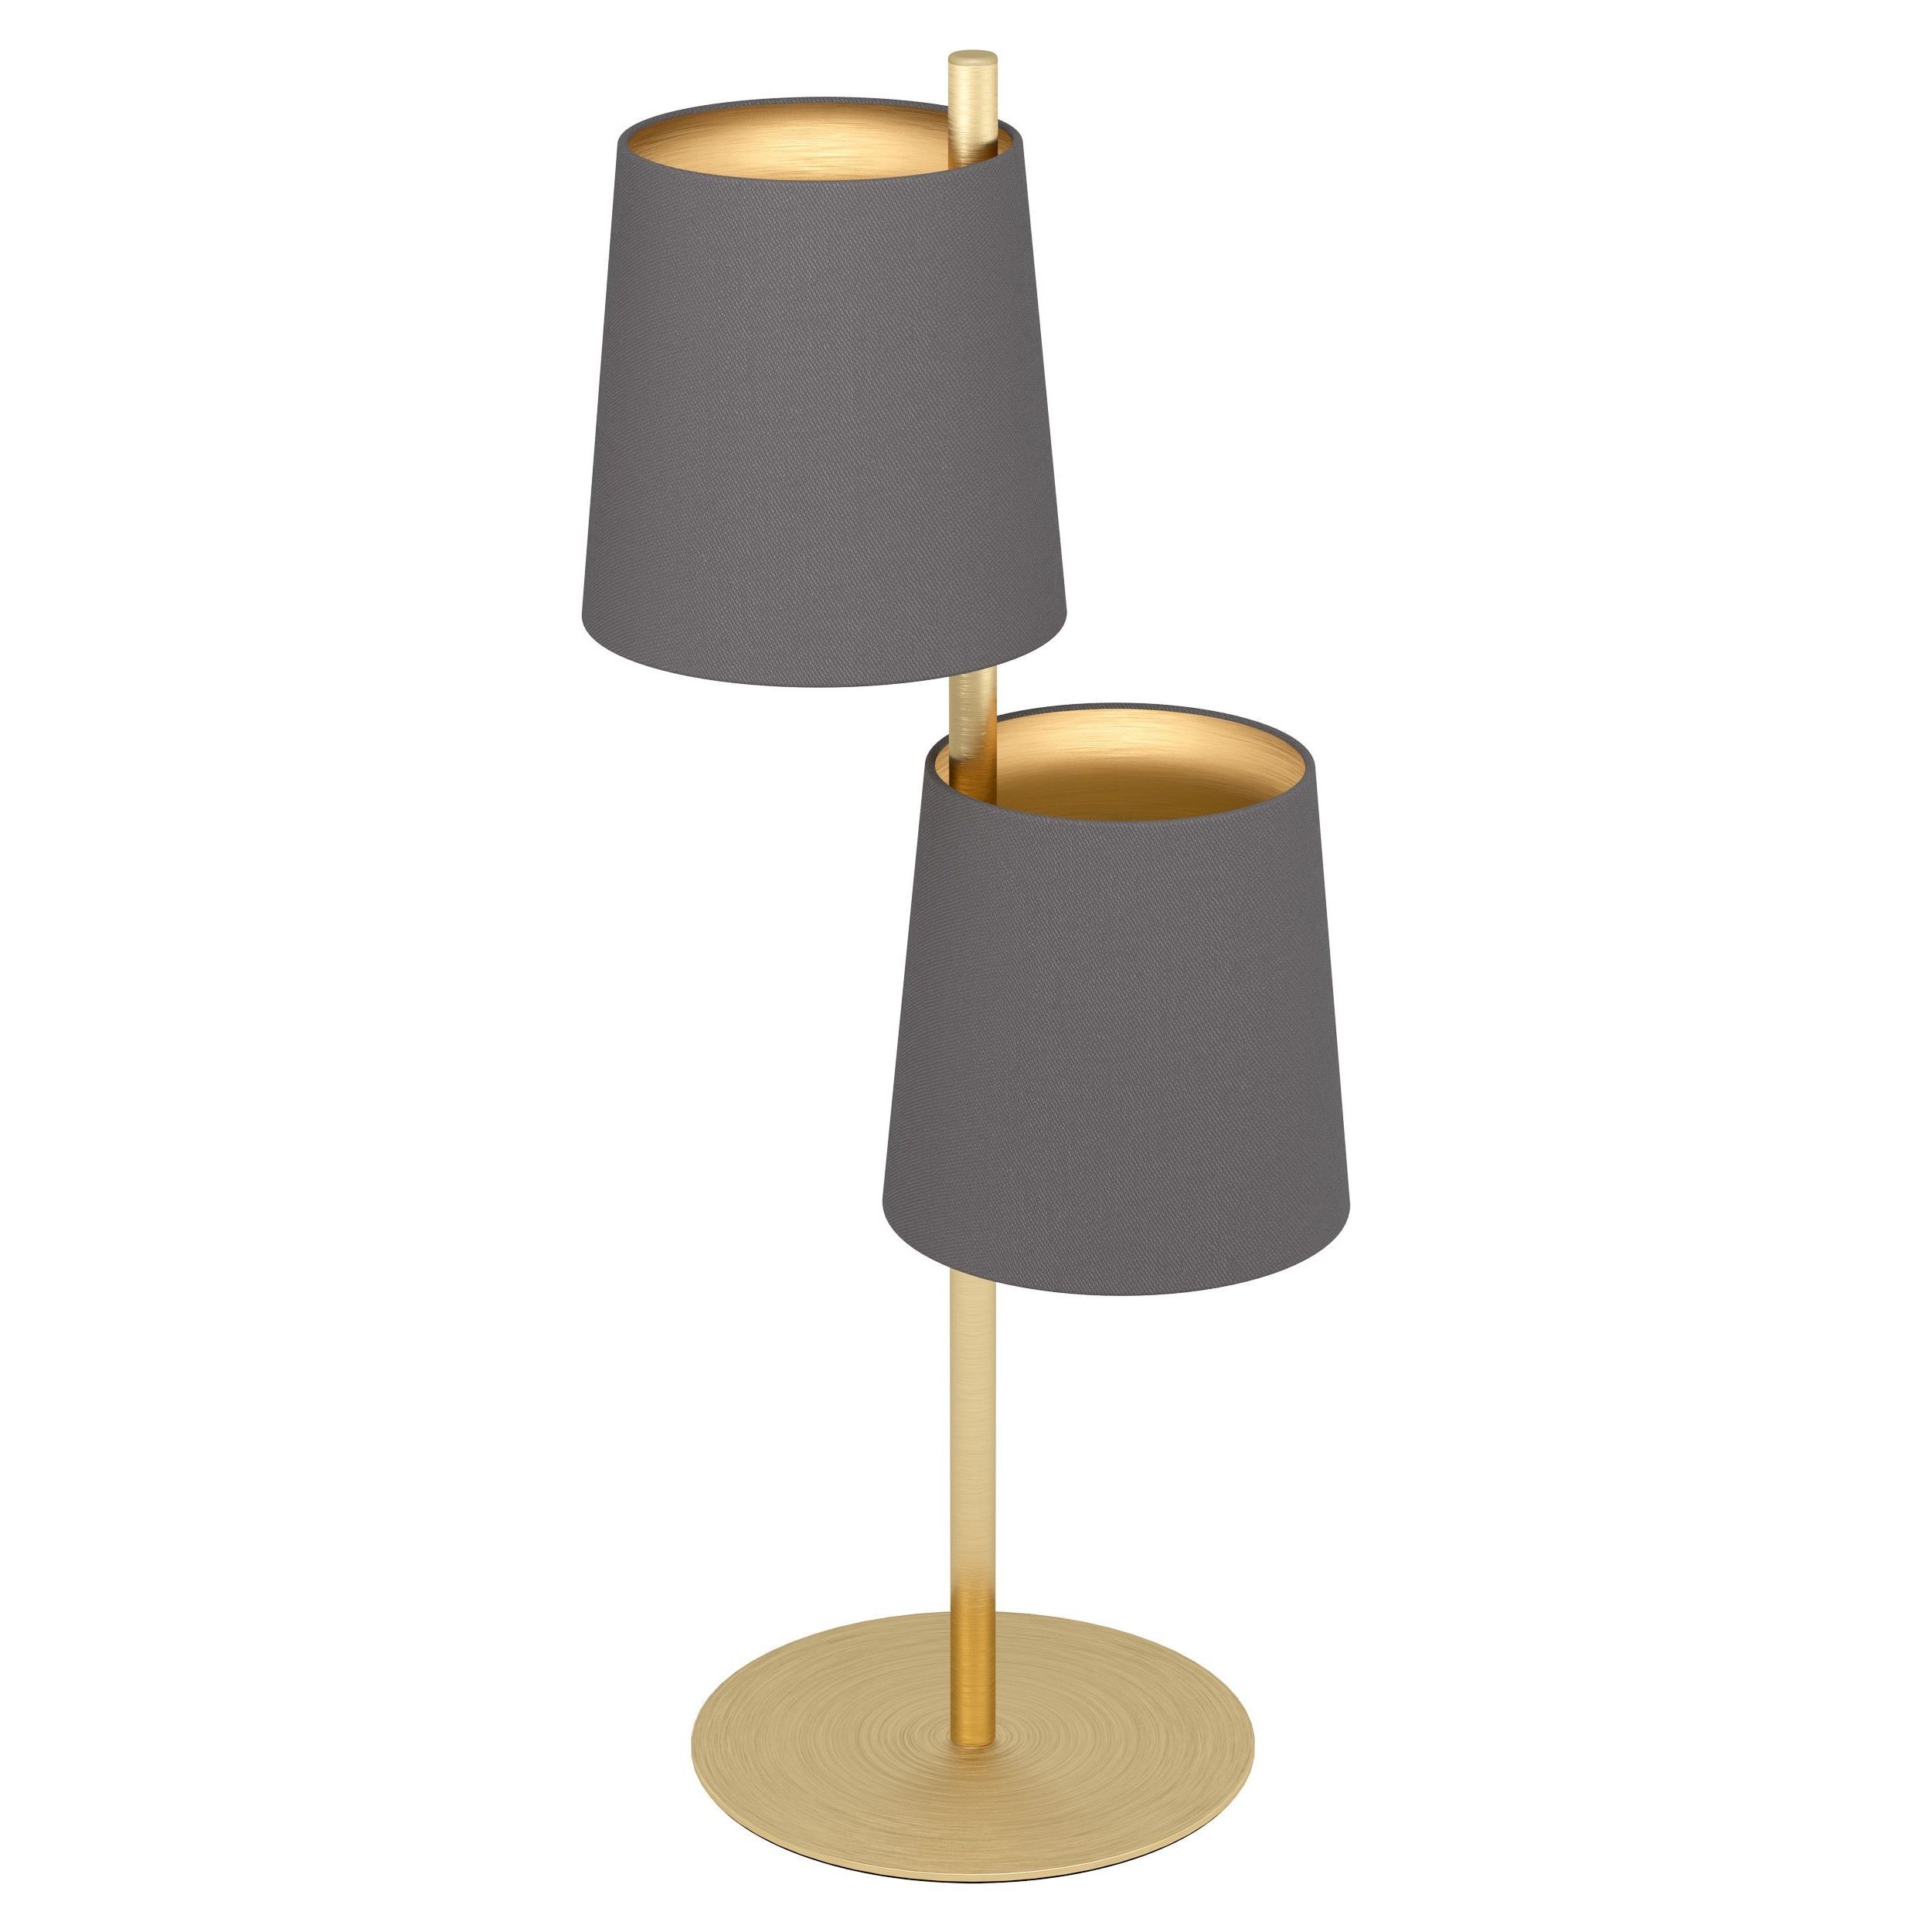 Trendy Lume Modern Lamp In Dove Gray And Gold Fabric 2 Lights Gl0029 In 2 Light Standing Lamps (View 5 of 10)